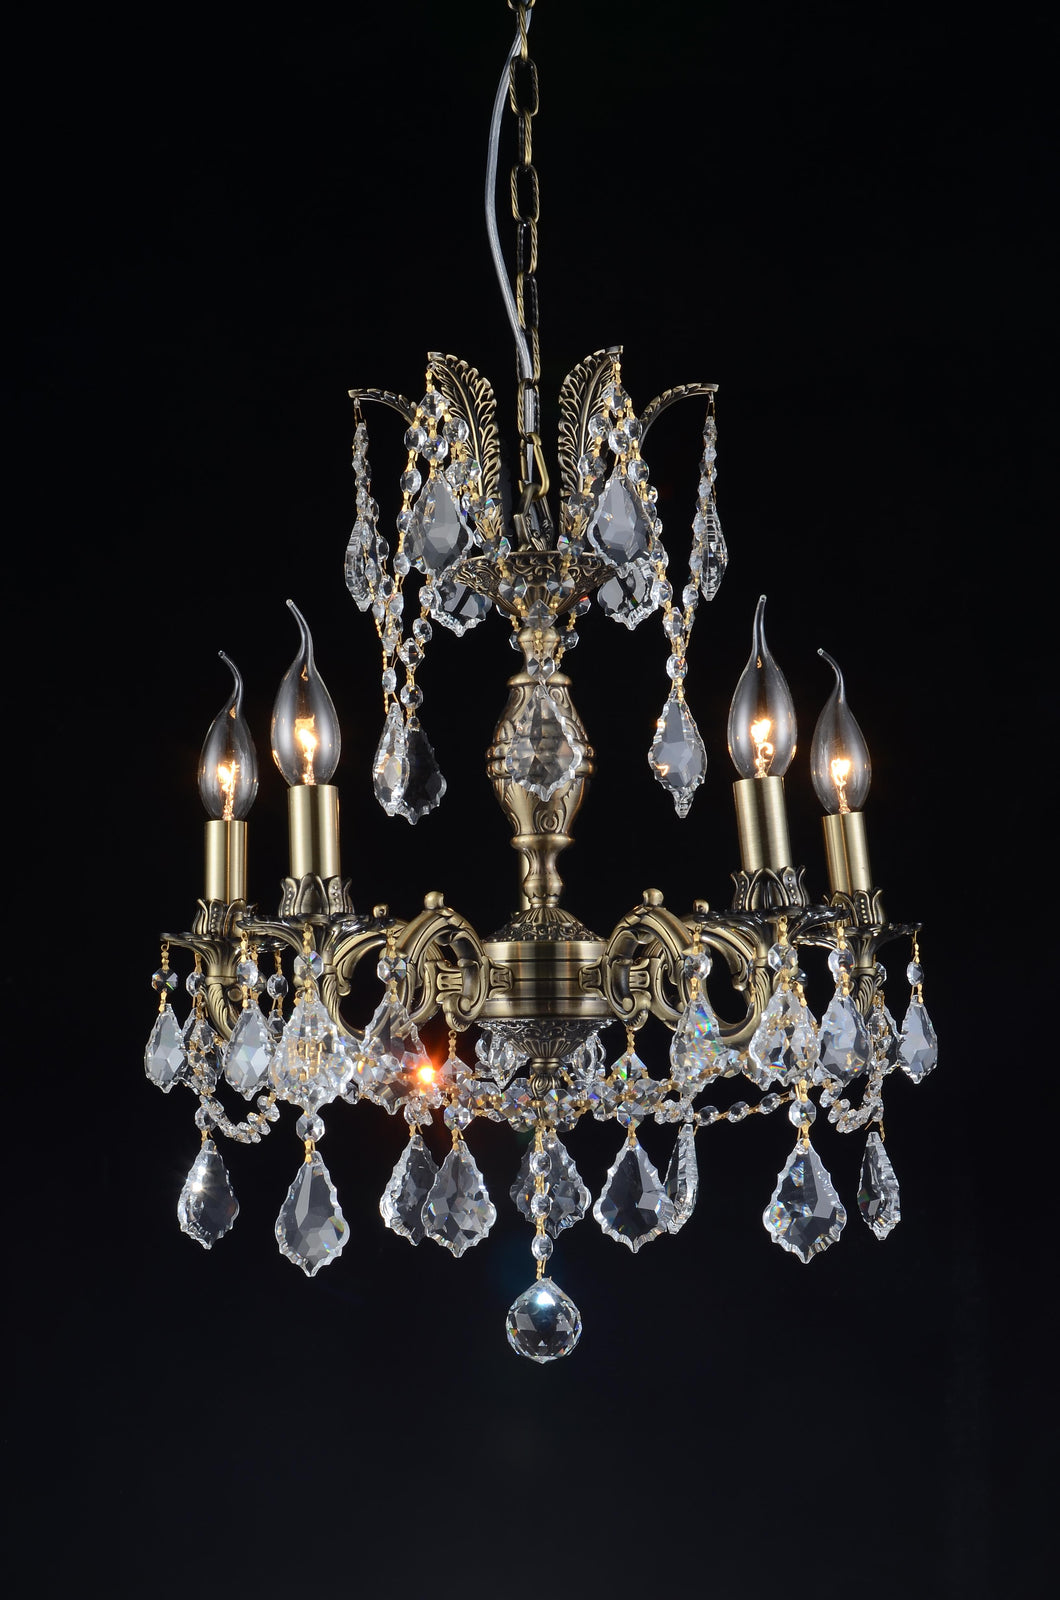 5 Light Up Chandelier with Antique Brass finish